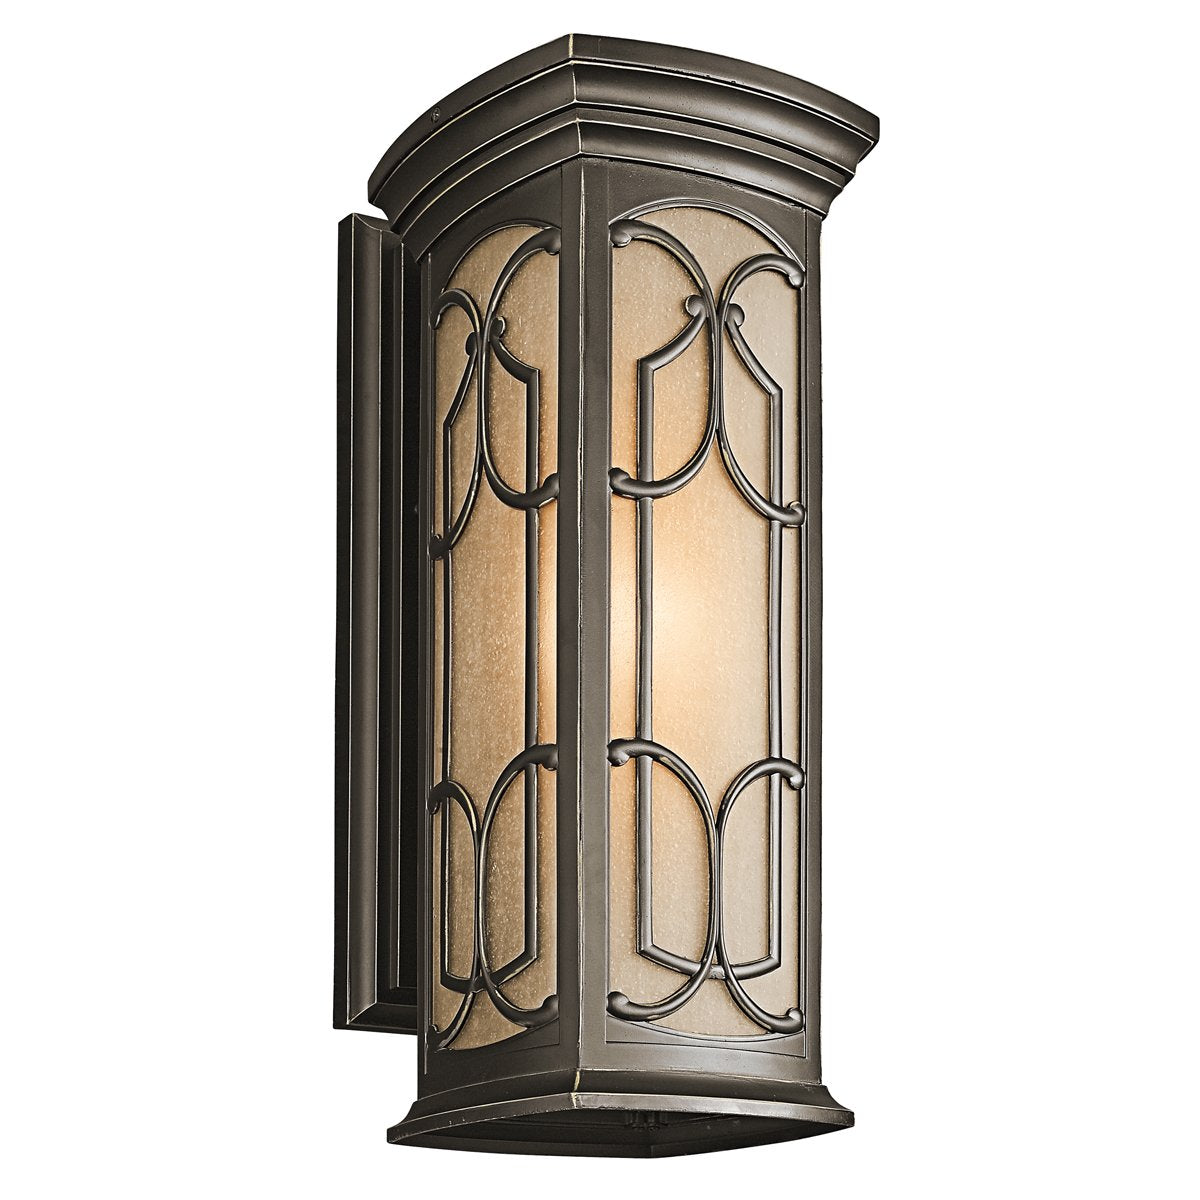 Cast aluminum  outside lights for house bronze exterior wall sconce